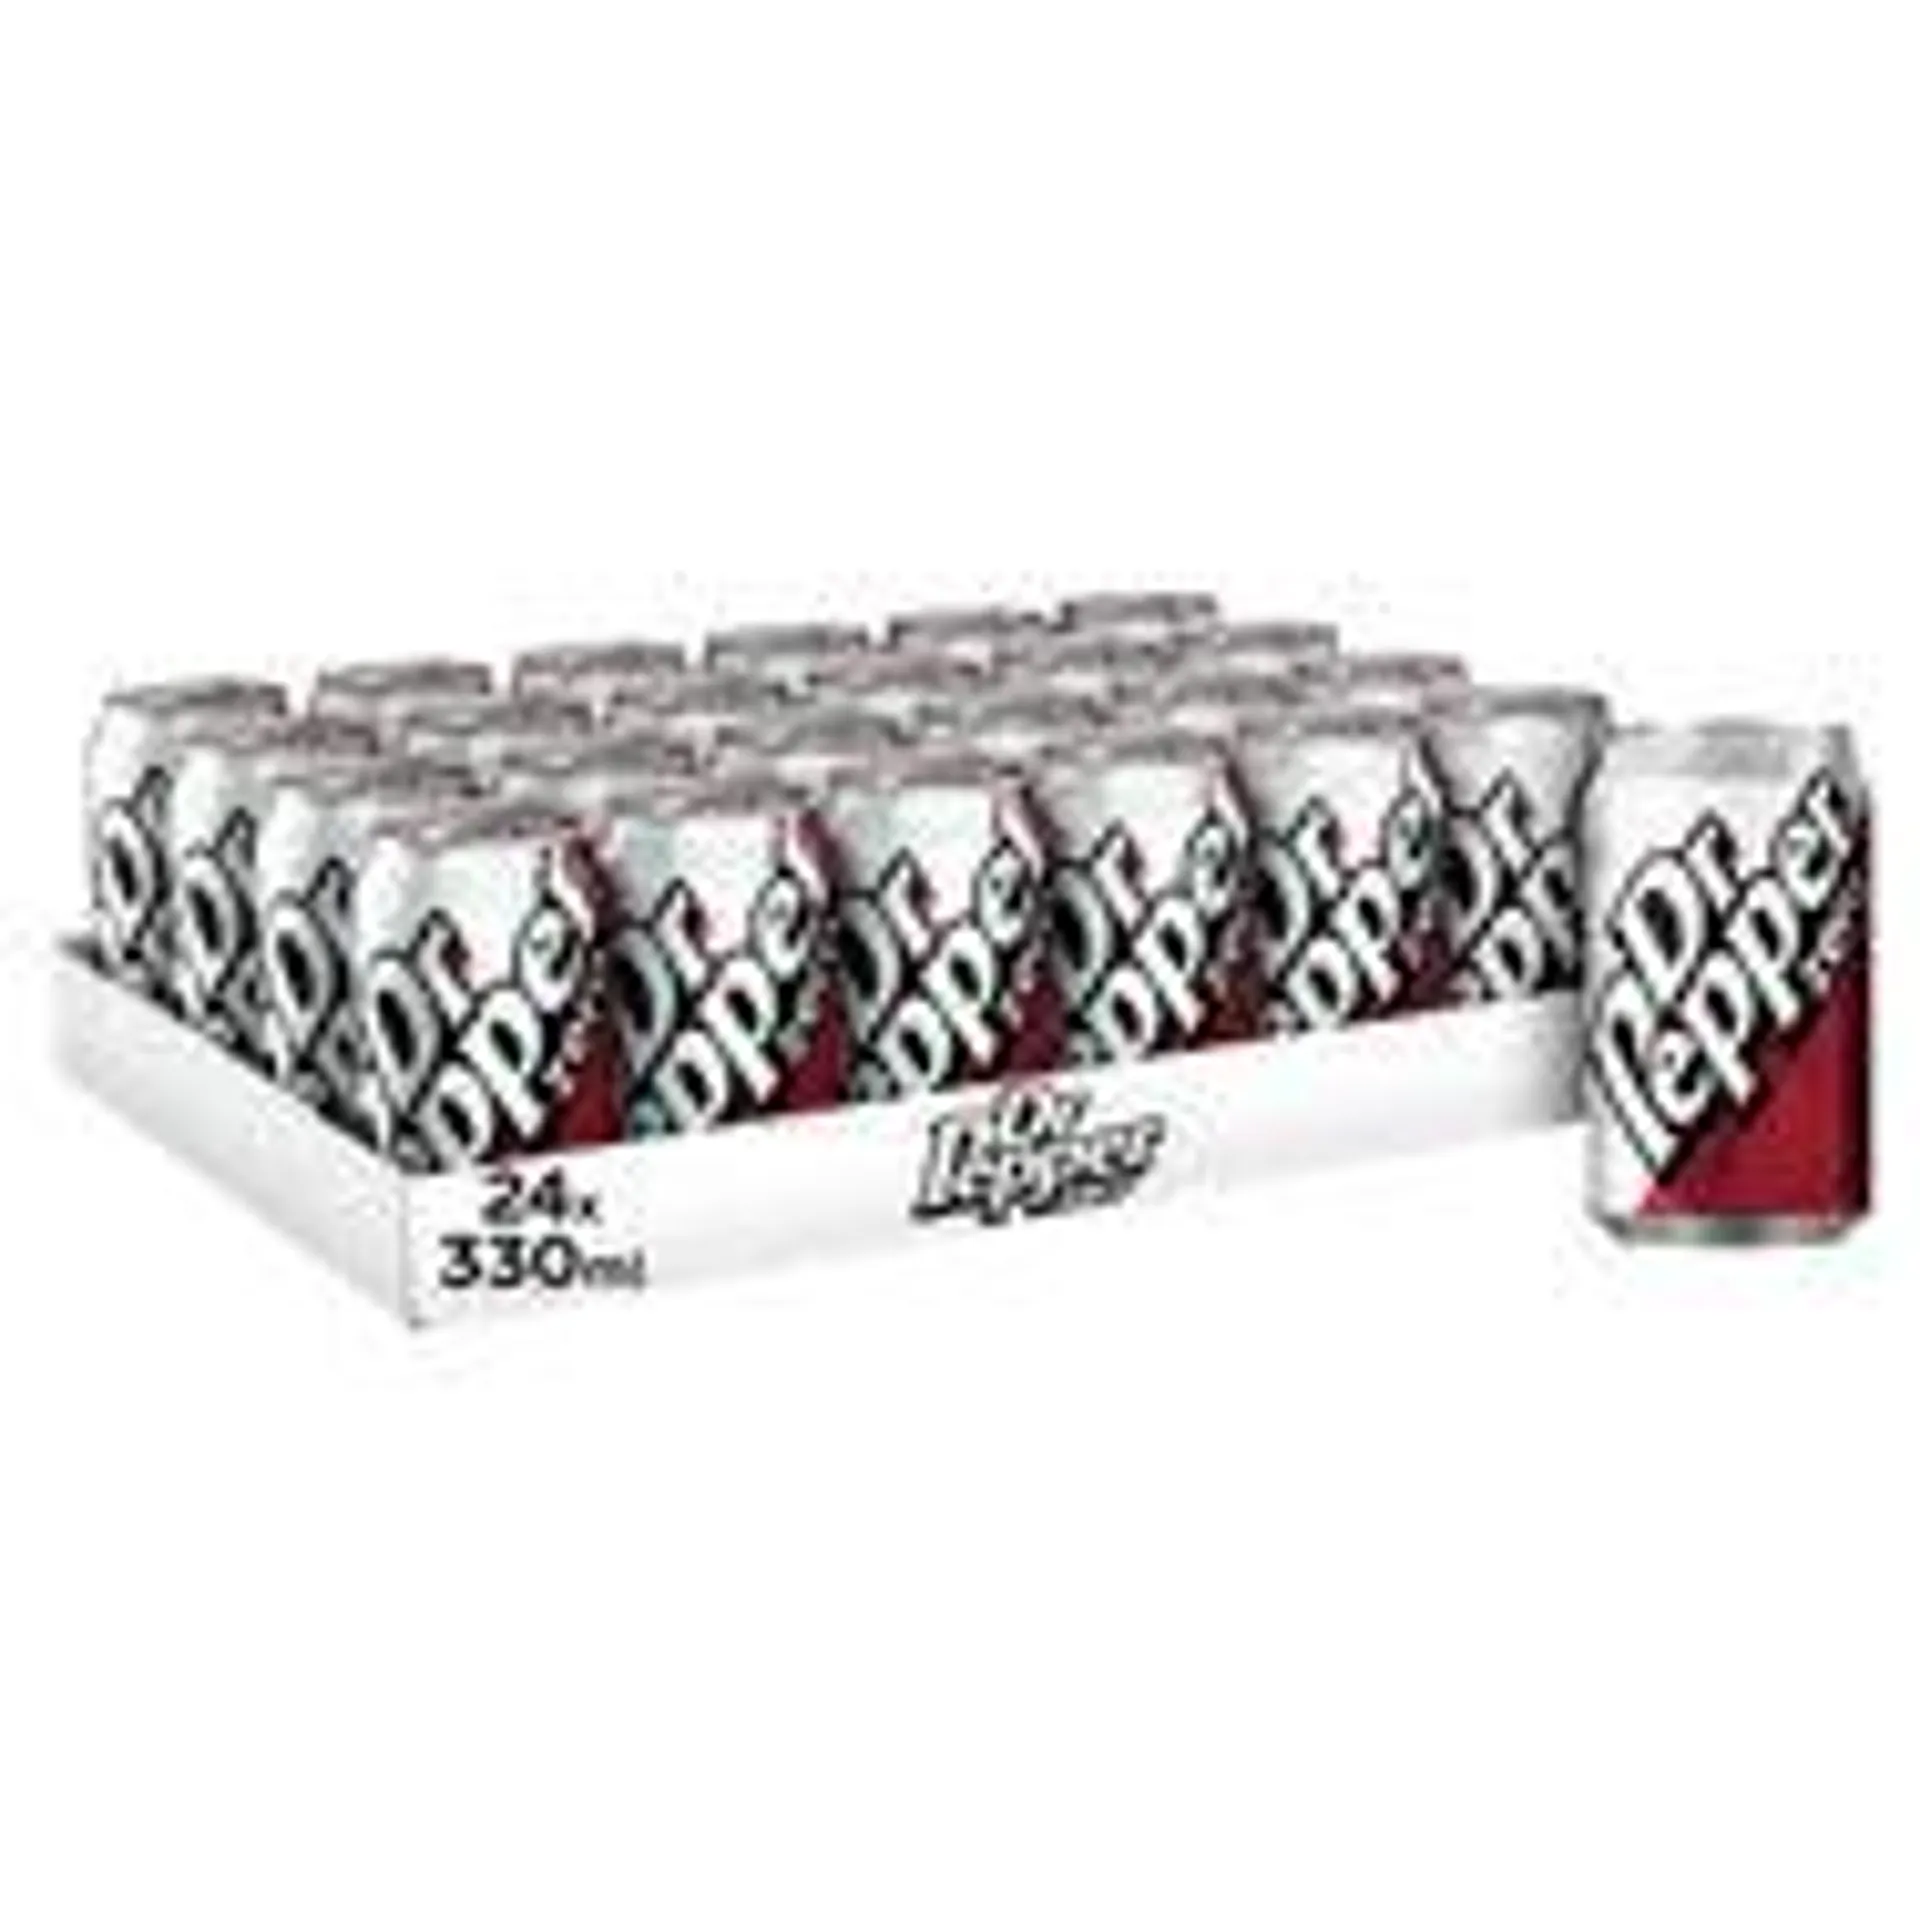 Dr Pepper Zero 24 Cans